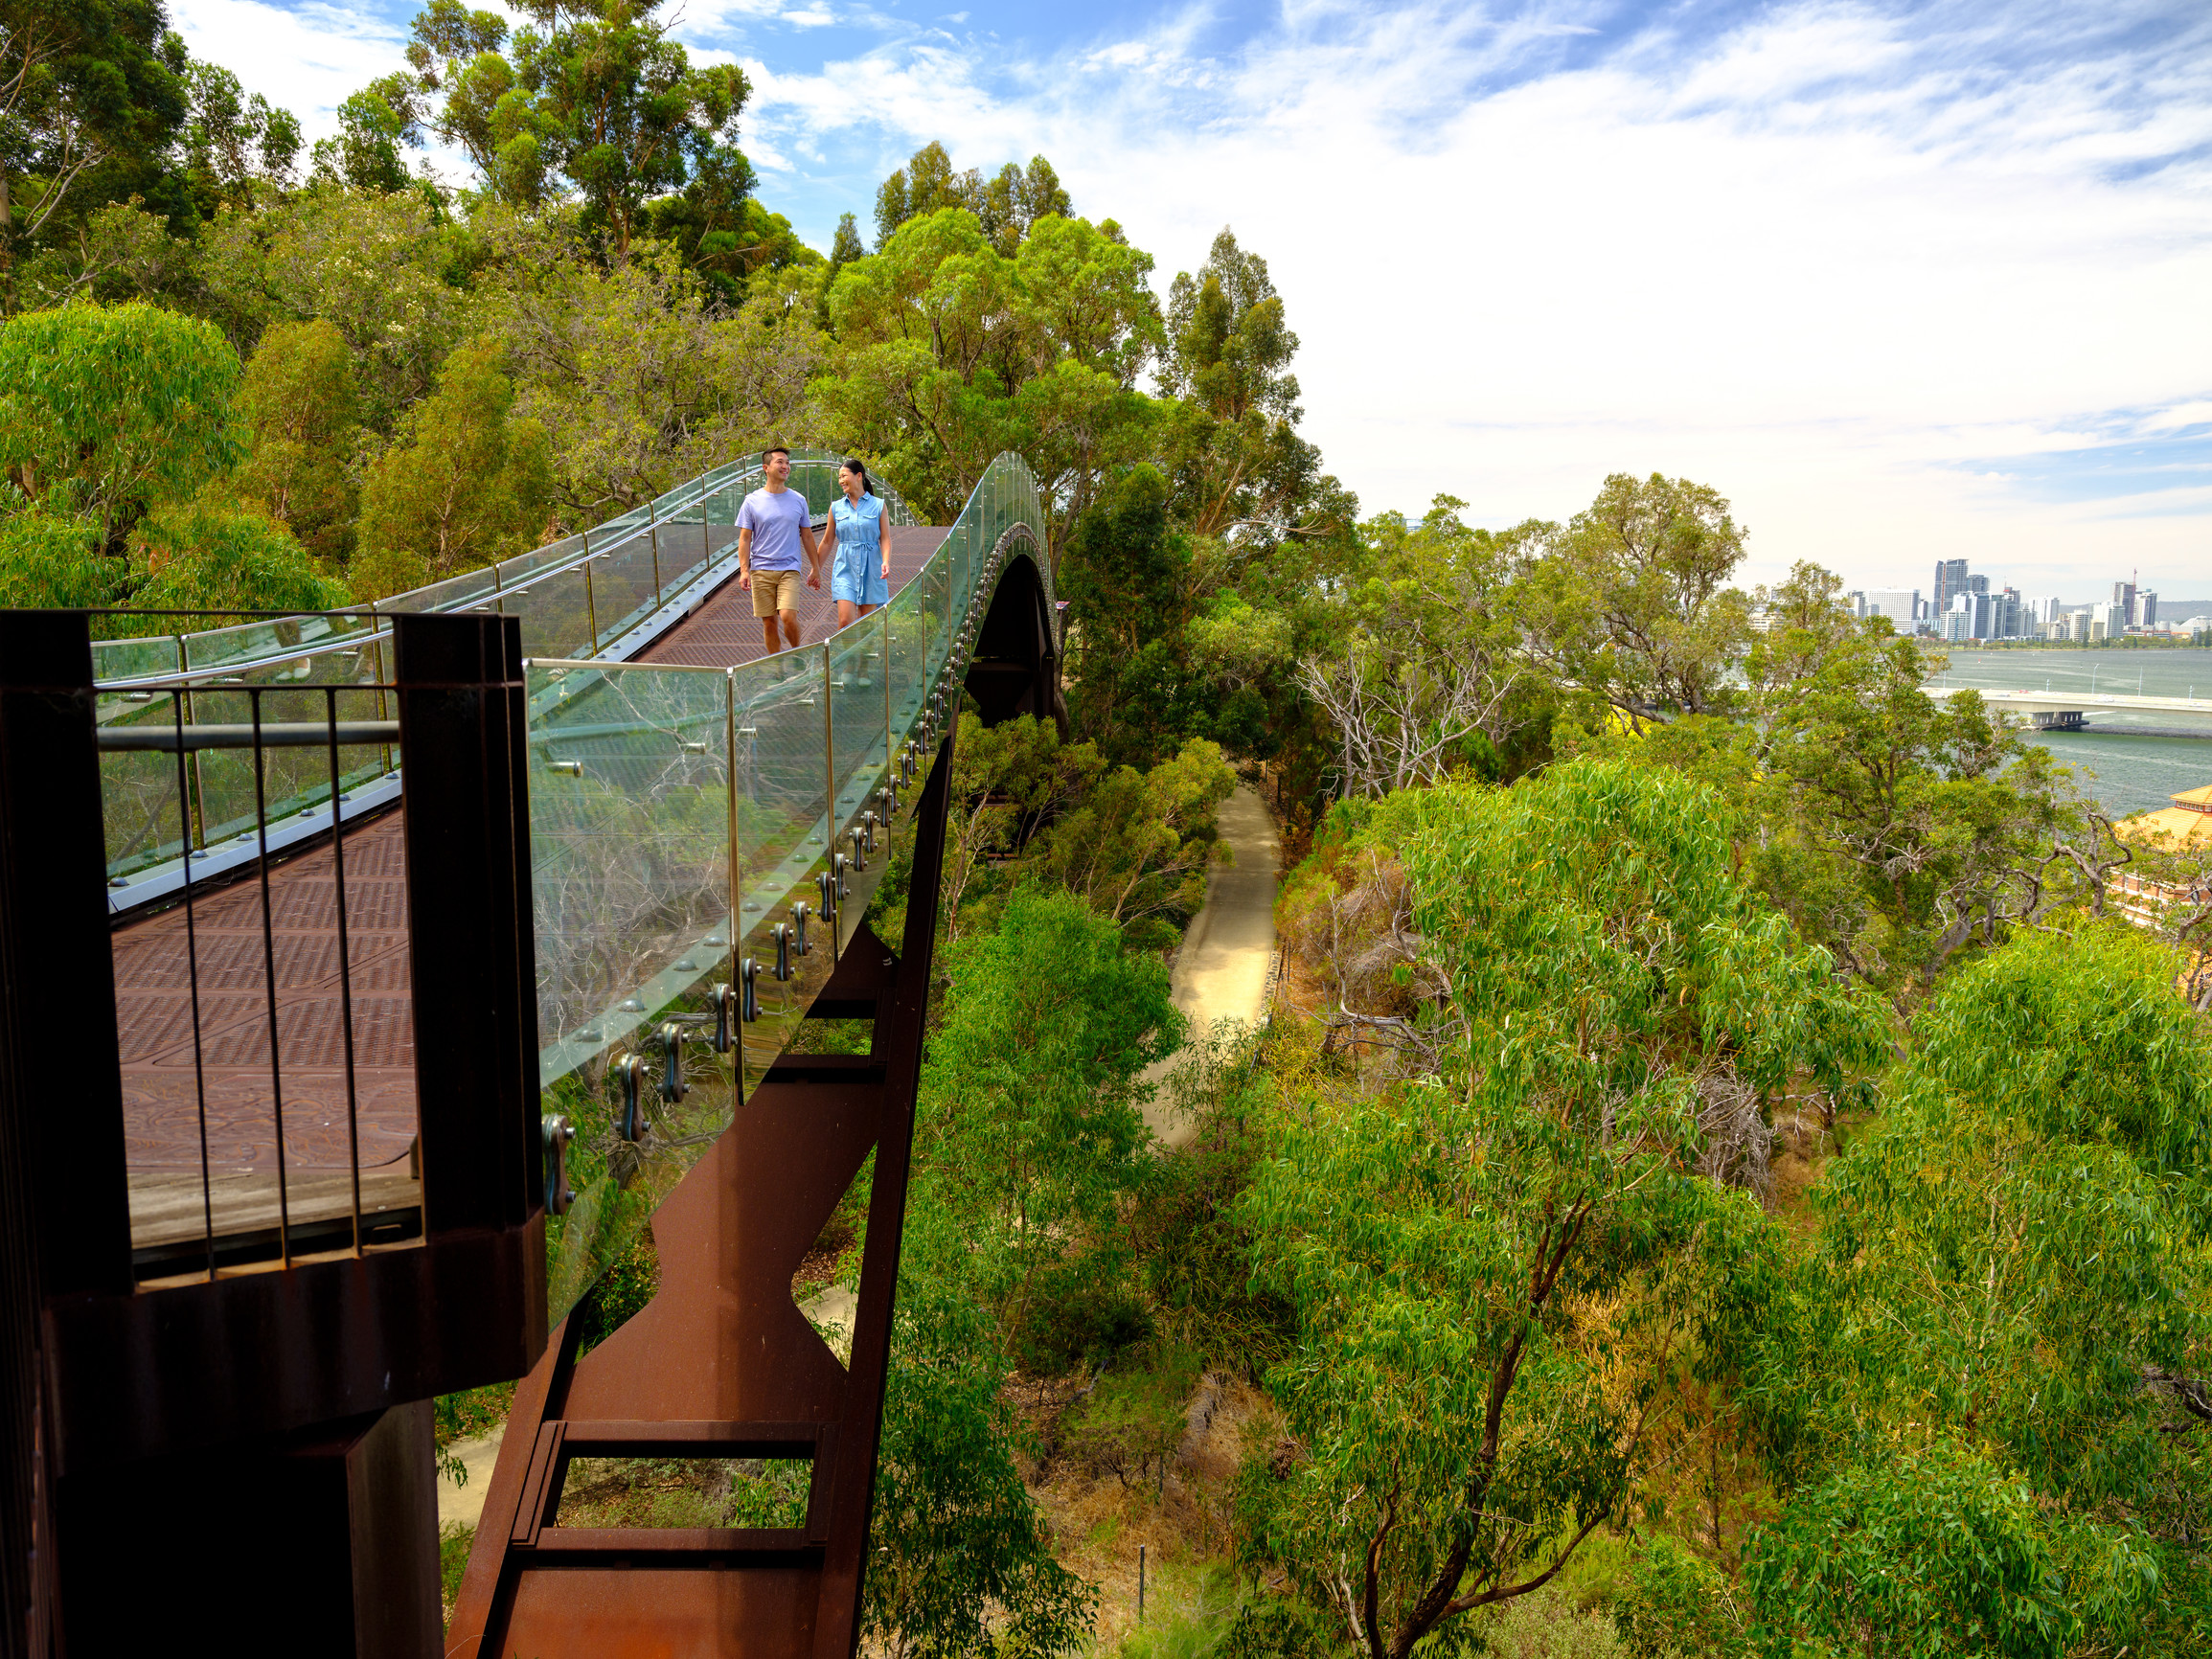 This photograph shows two (2) people walking across the steel bridge along the Lotterywest Federation Walkway. They are walking towards the camera and are holding hands. The side barriers of the bridge are glass, and the base is red/brown steel. A flat, cream-coloured walk path can be seen below the bridge which is placed amongst a thick green forest. The city skyline and the Swan River can be seen on the right. The sky above is full of white clouds with some patches of blue.